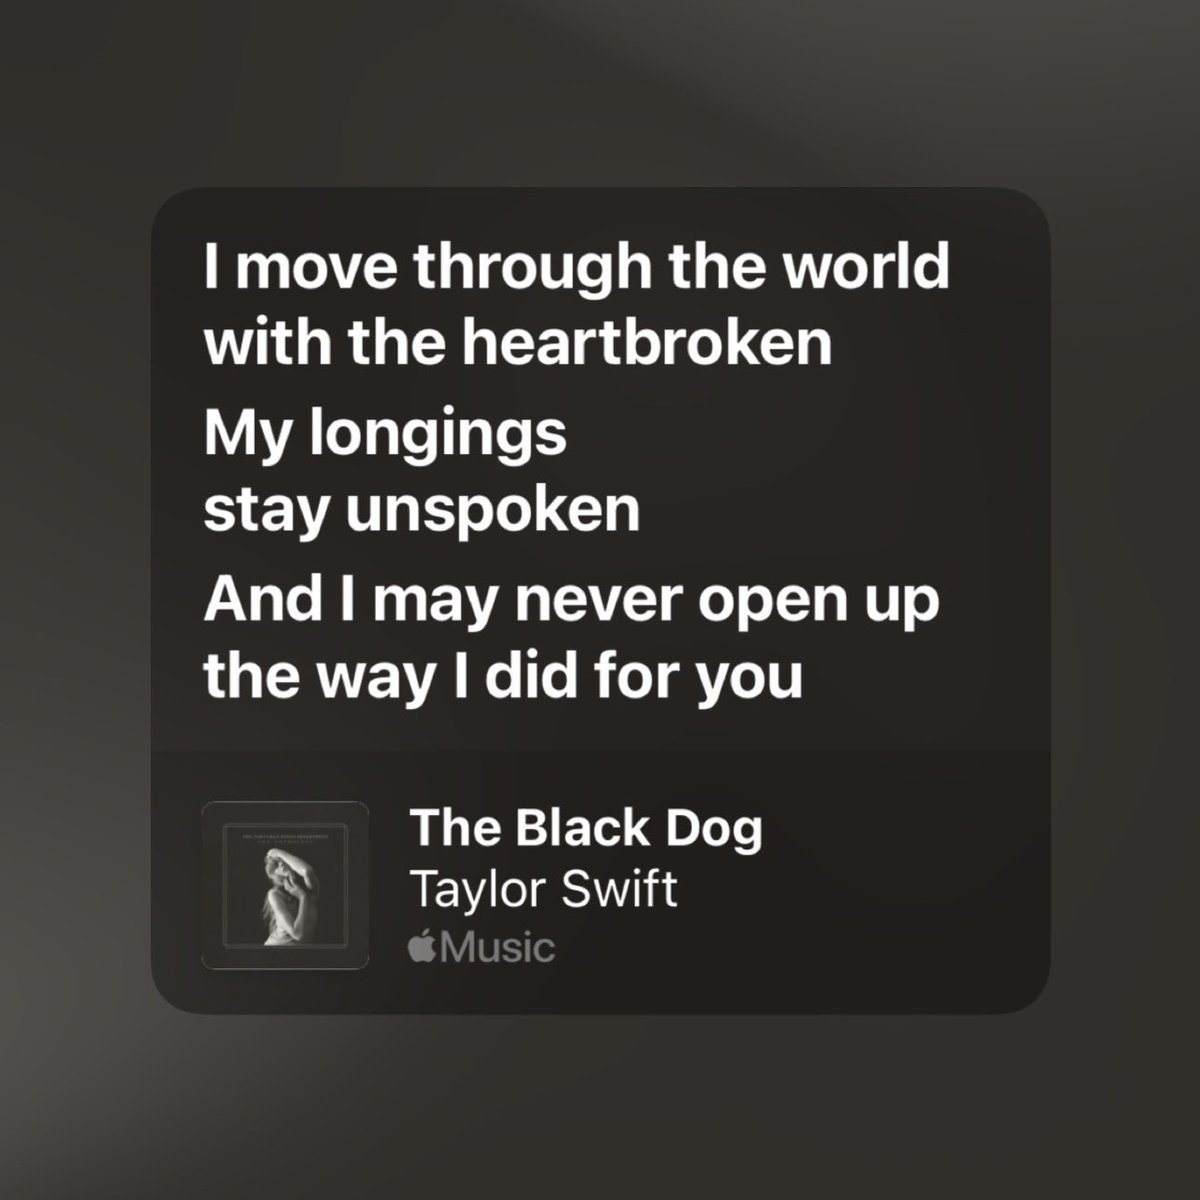 The Black Dog “I move through the world with the heartbroken, my longings stay unspoken and I may never open up the way I did for you (…) And it kills me, I just don’t understand how you don’t miss me.”